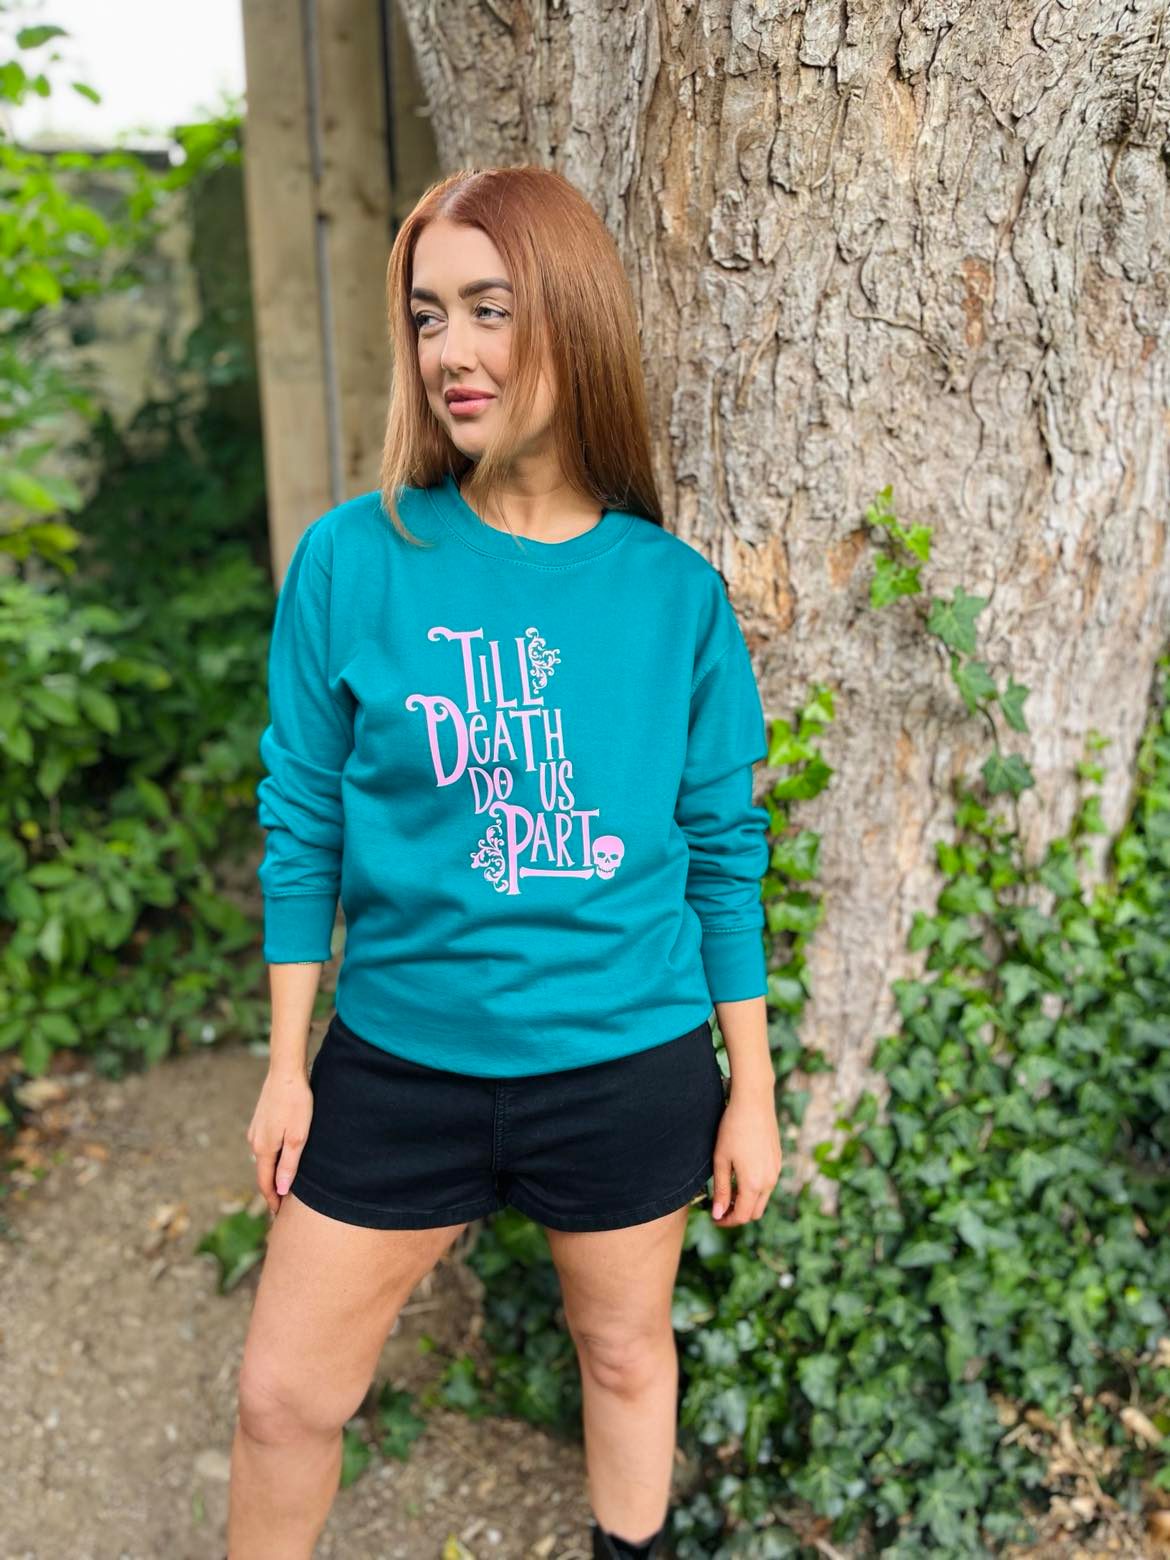 SALE SMALL JADE DEATH DO US PART SWEATER PINK TEXT